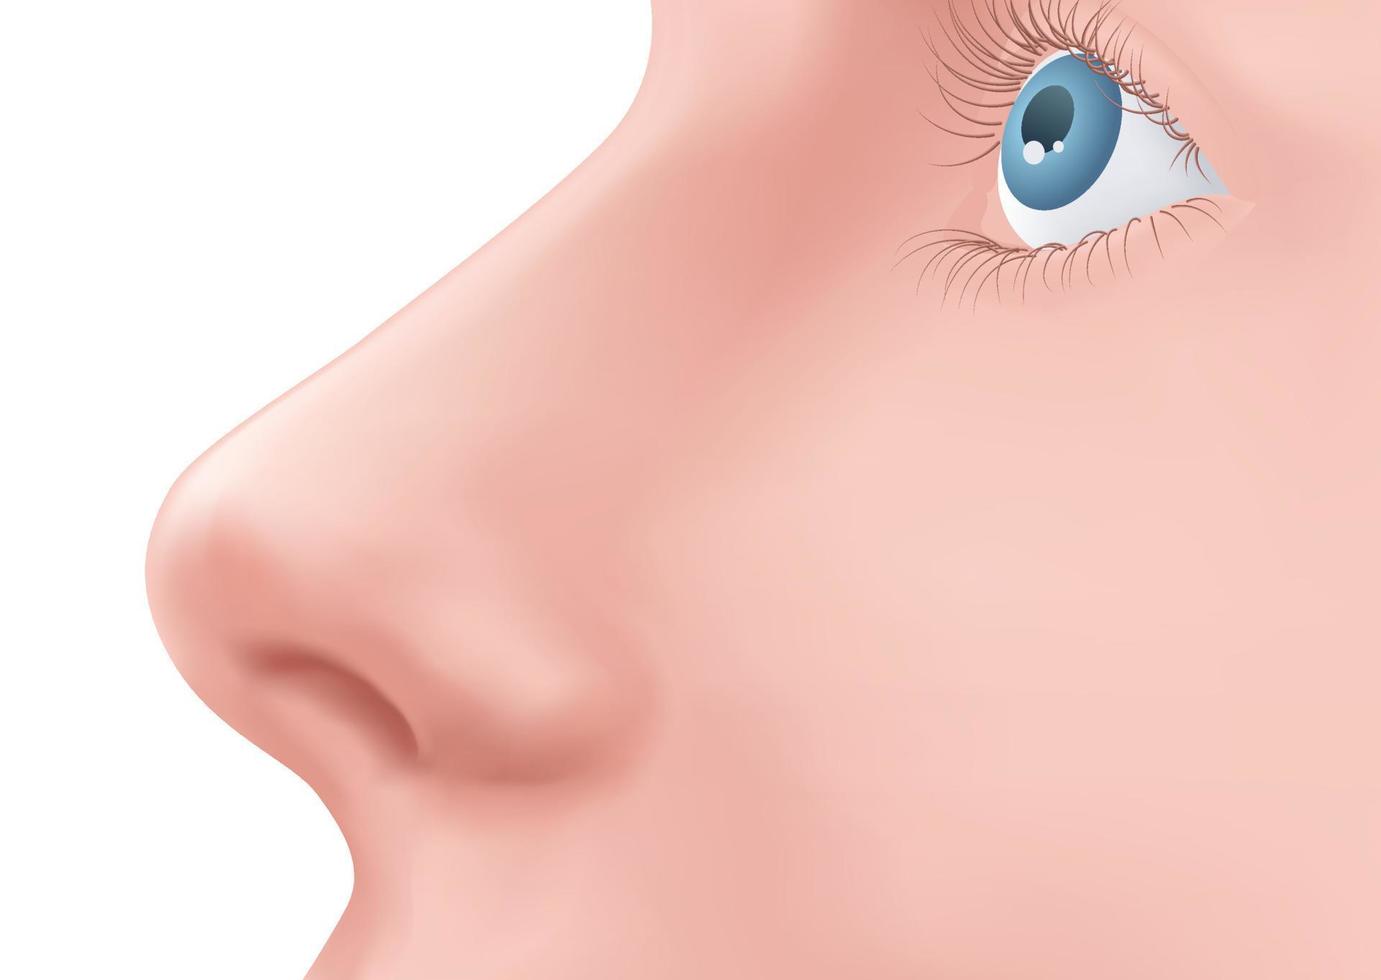 Profile view Human Nose and blue eye with eyelashes on the face realistic Illustration for medicine, Isolated on white background Design Vector. Rhinoplasty example. Body part for biology. vector